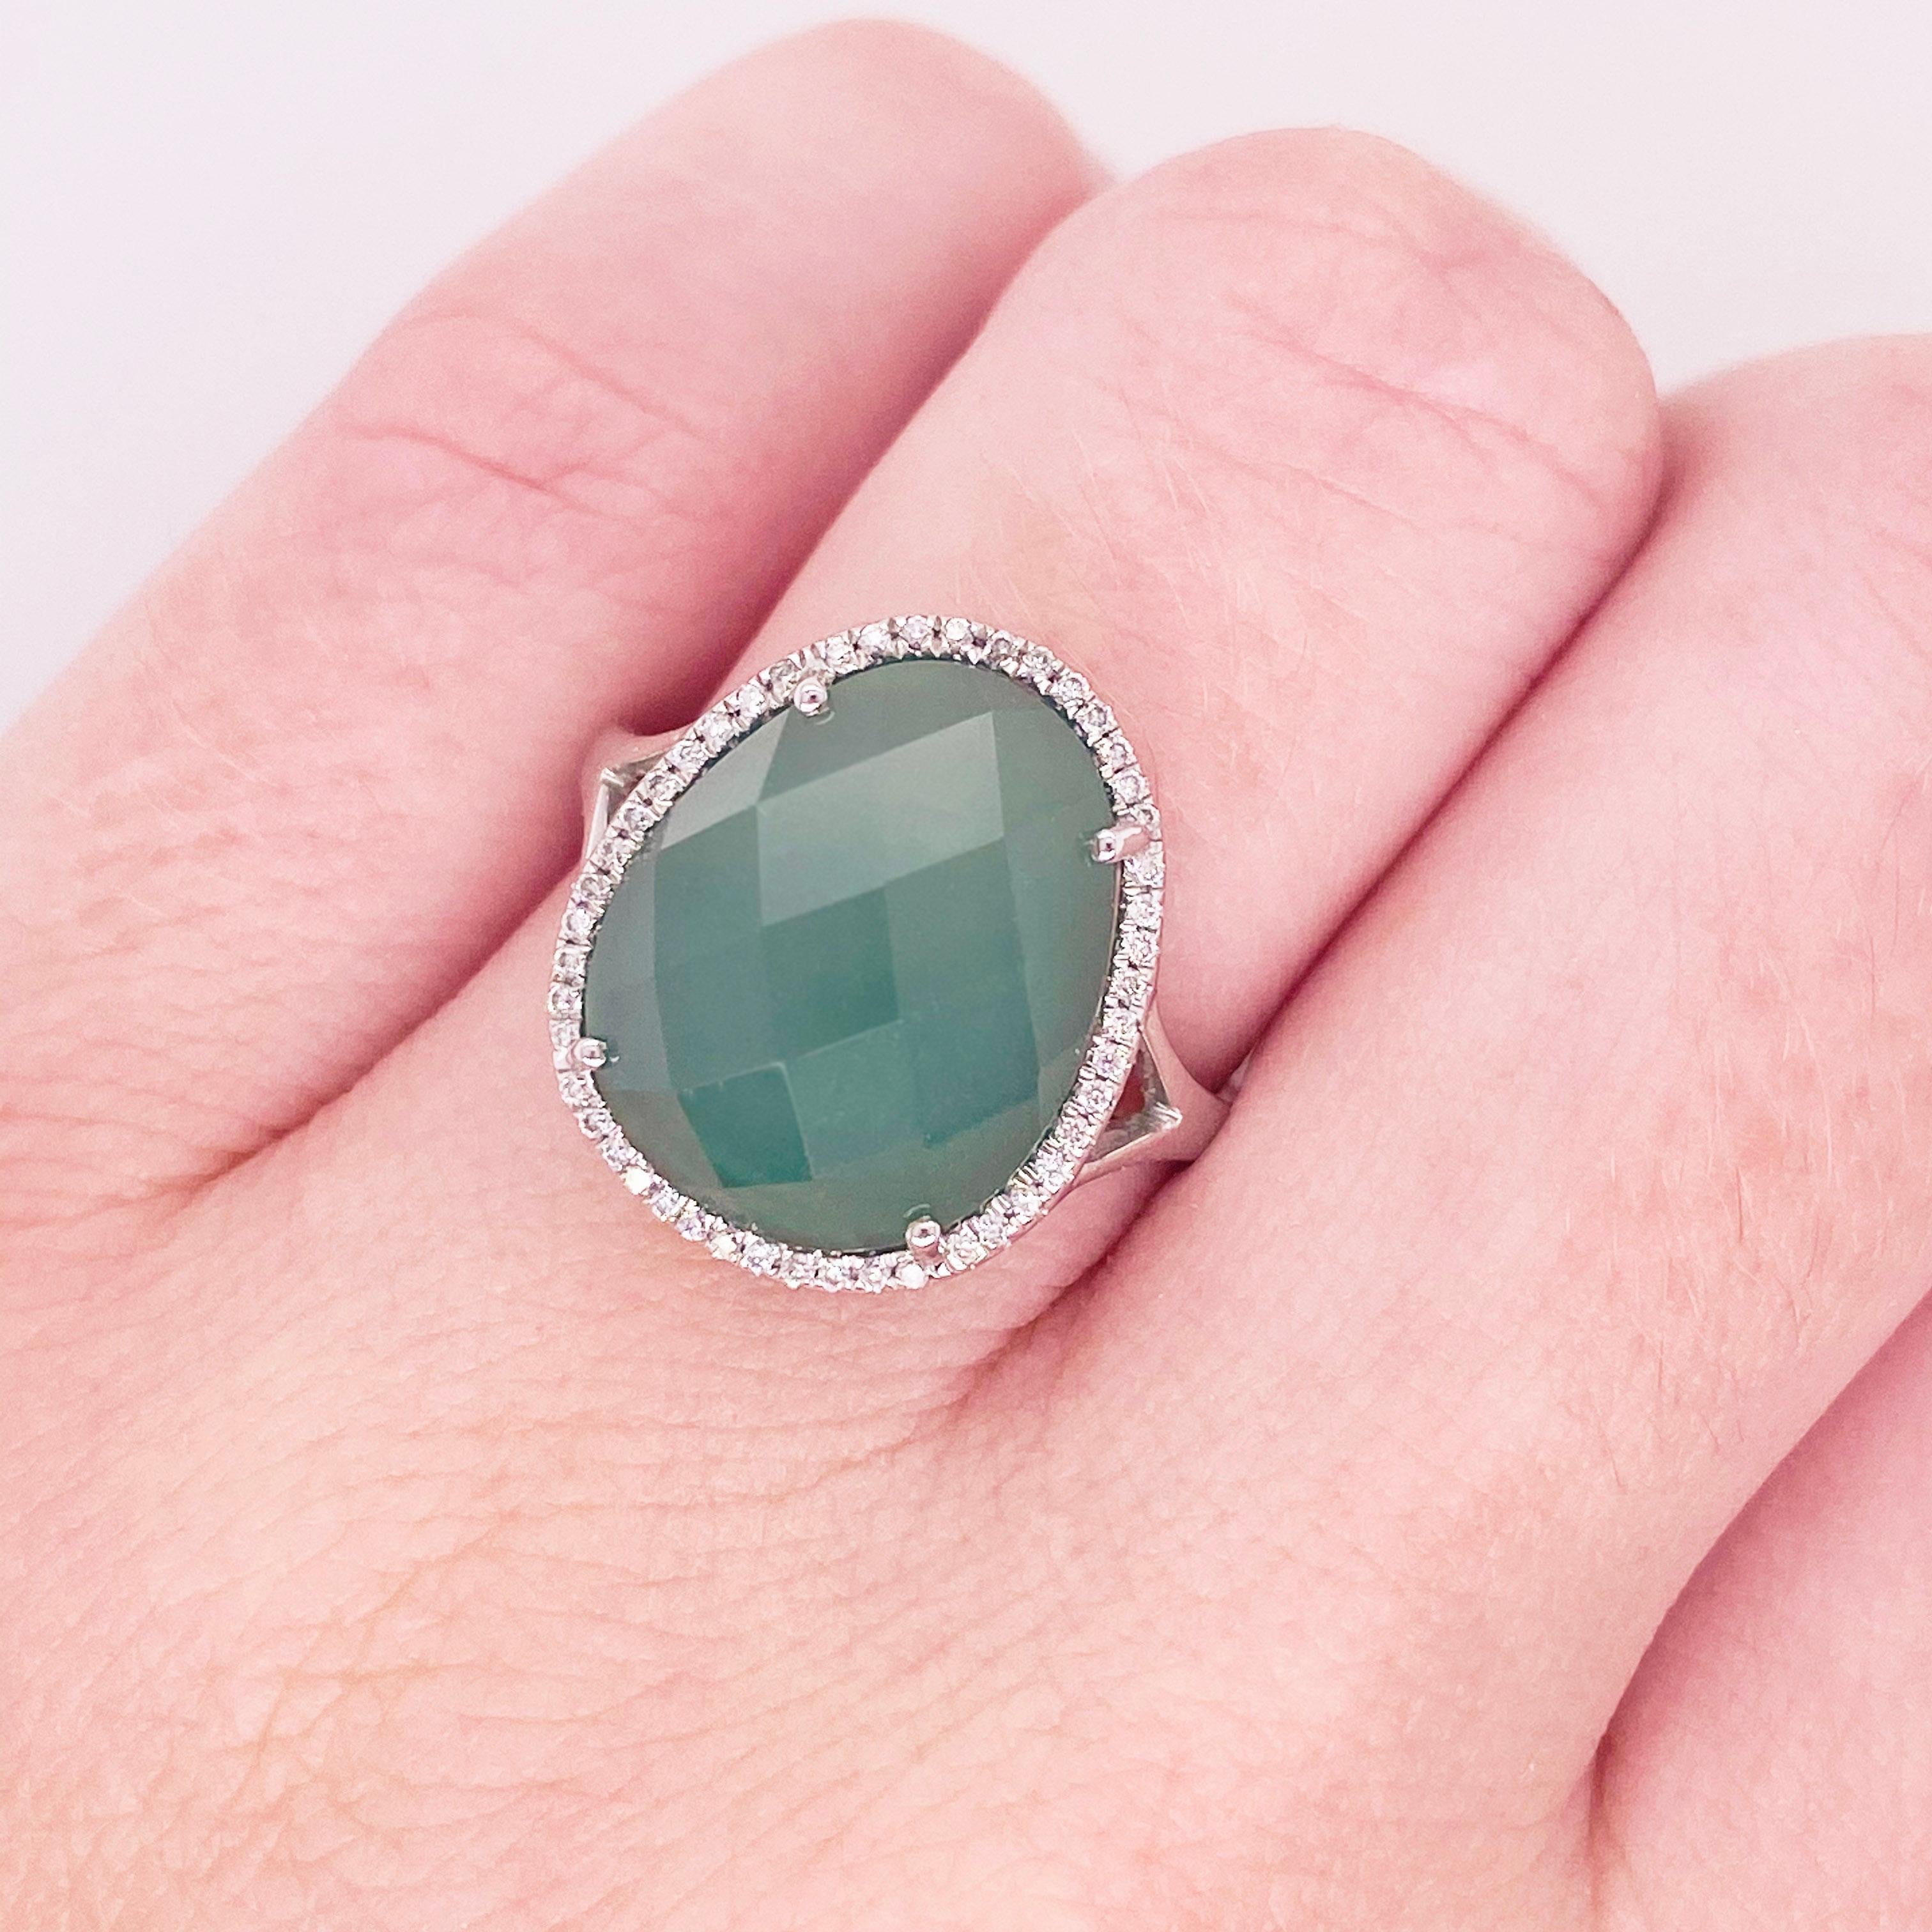 This stunning green quartz surrounded by beautiful white diamonds provides a look that is both very modern and very classic at the same time. Bombe rings are the hottest thing in jewelry fashion, and can be seen gracing the fingers of countless